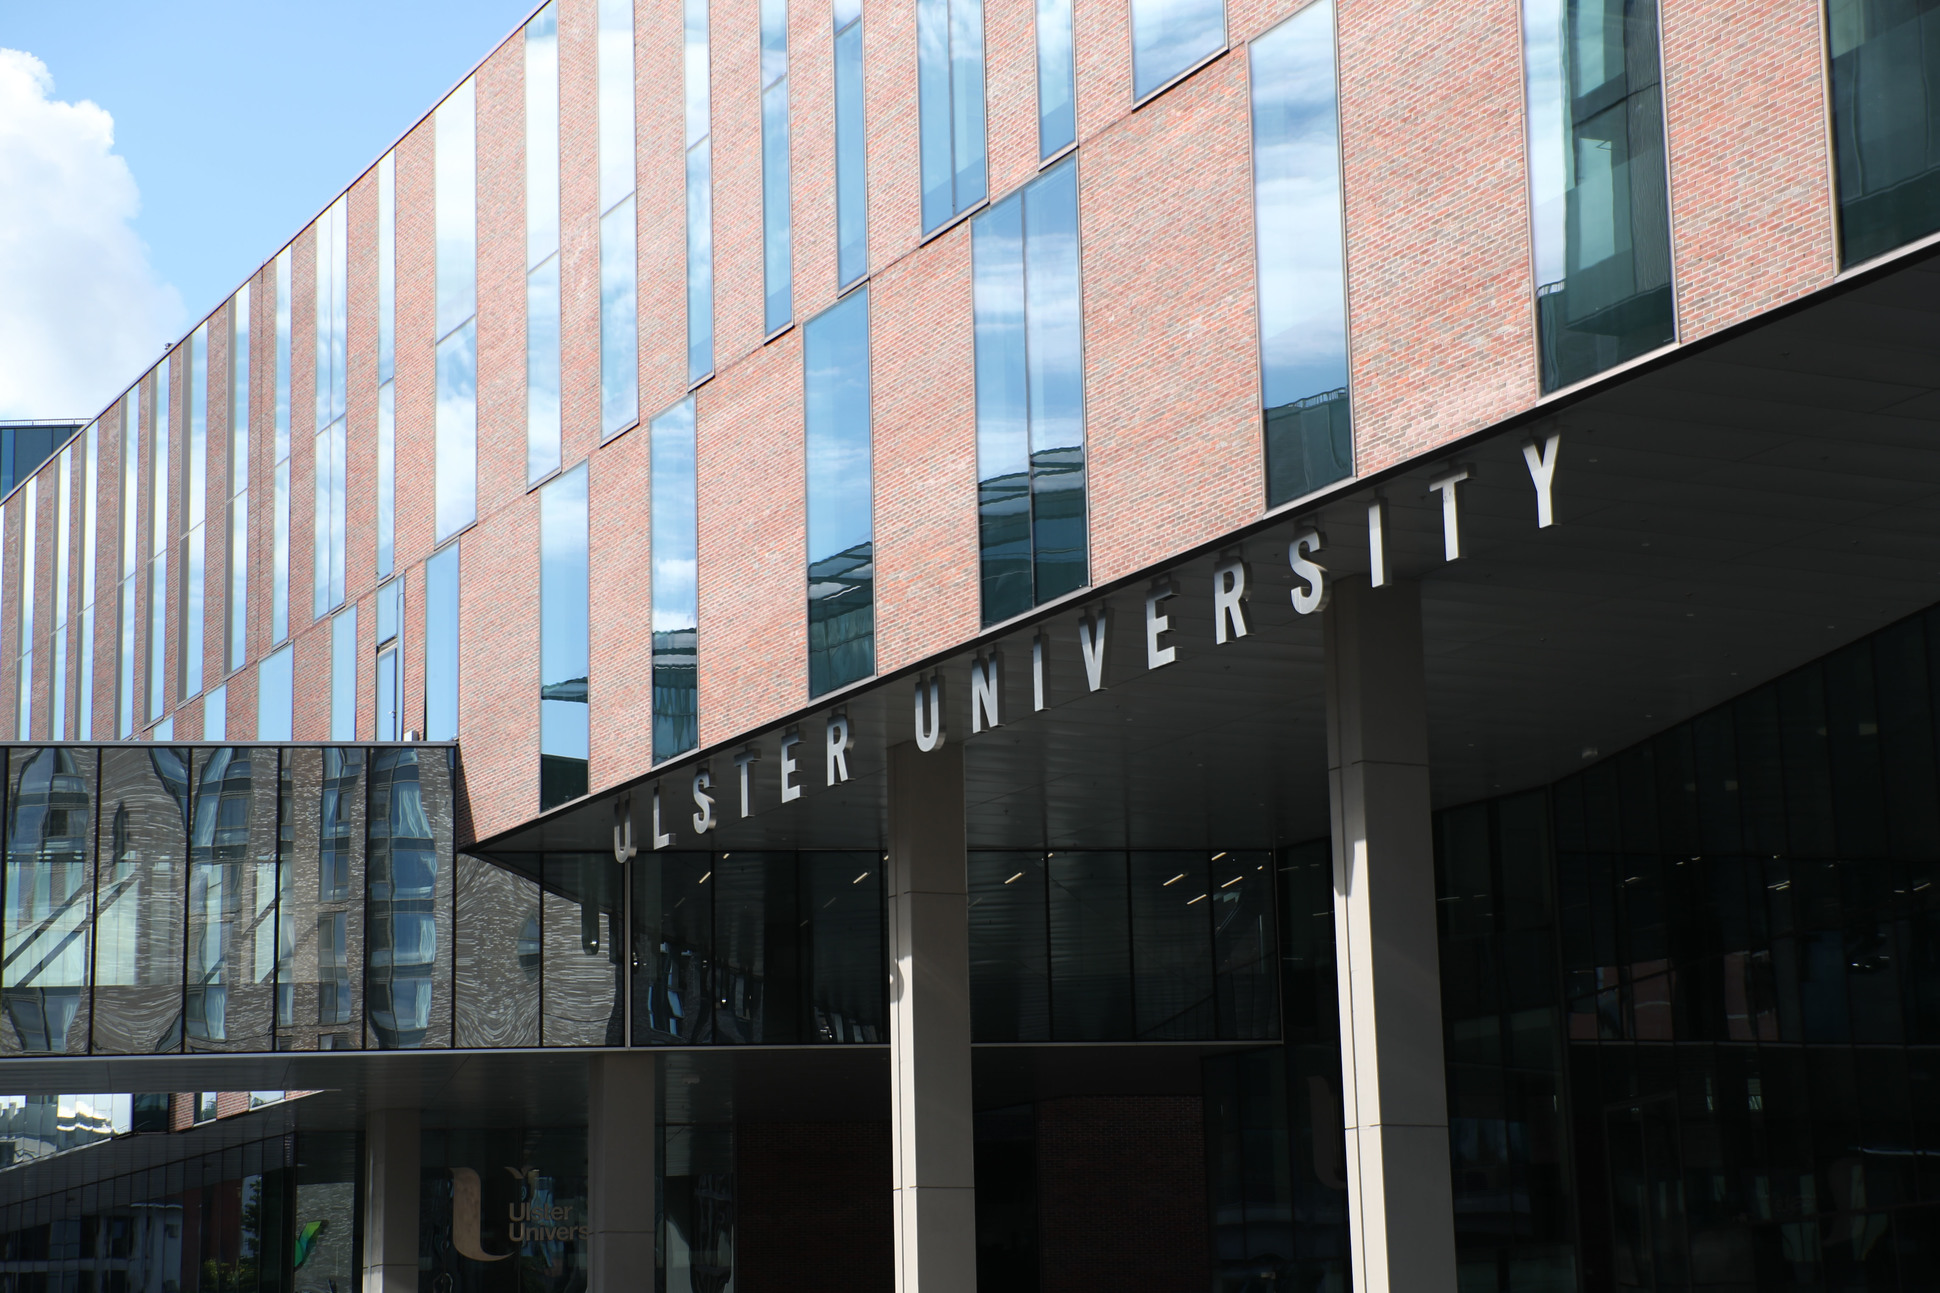 WATCH We go behind the scenes of the new Ulster University Belfast campus